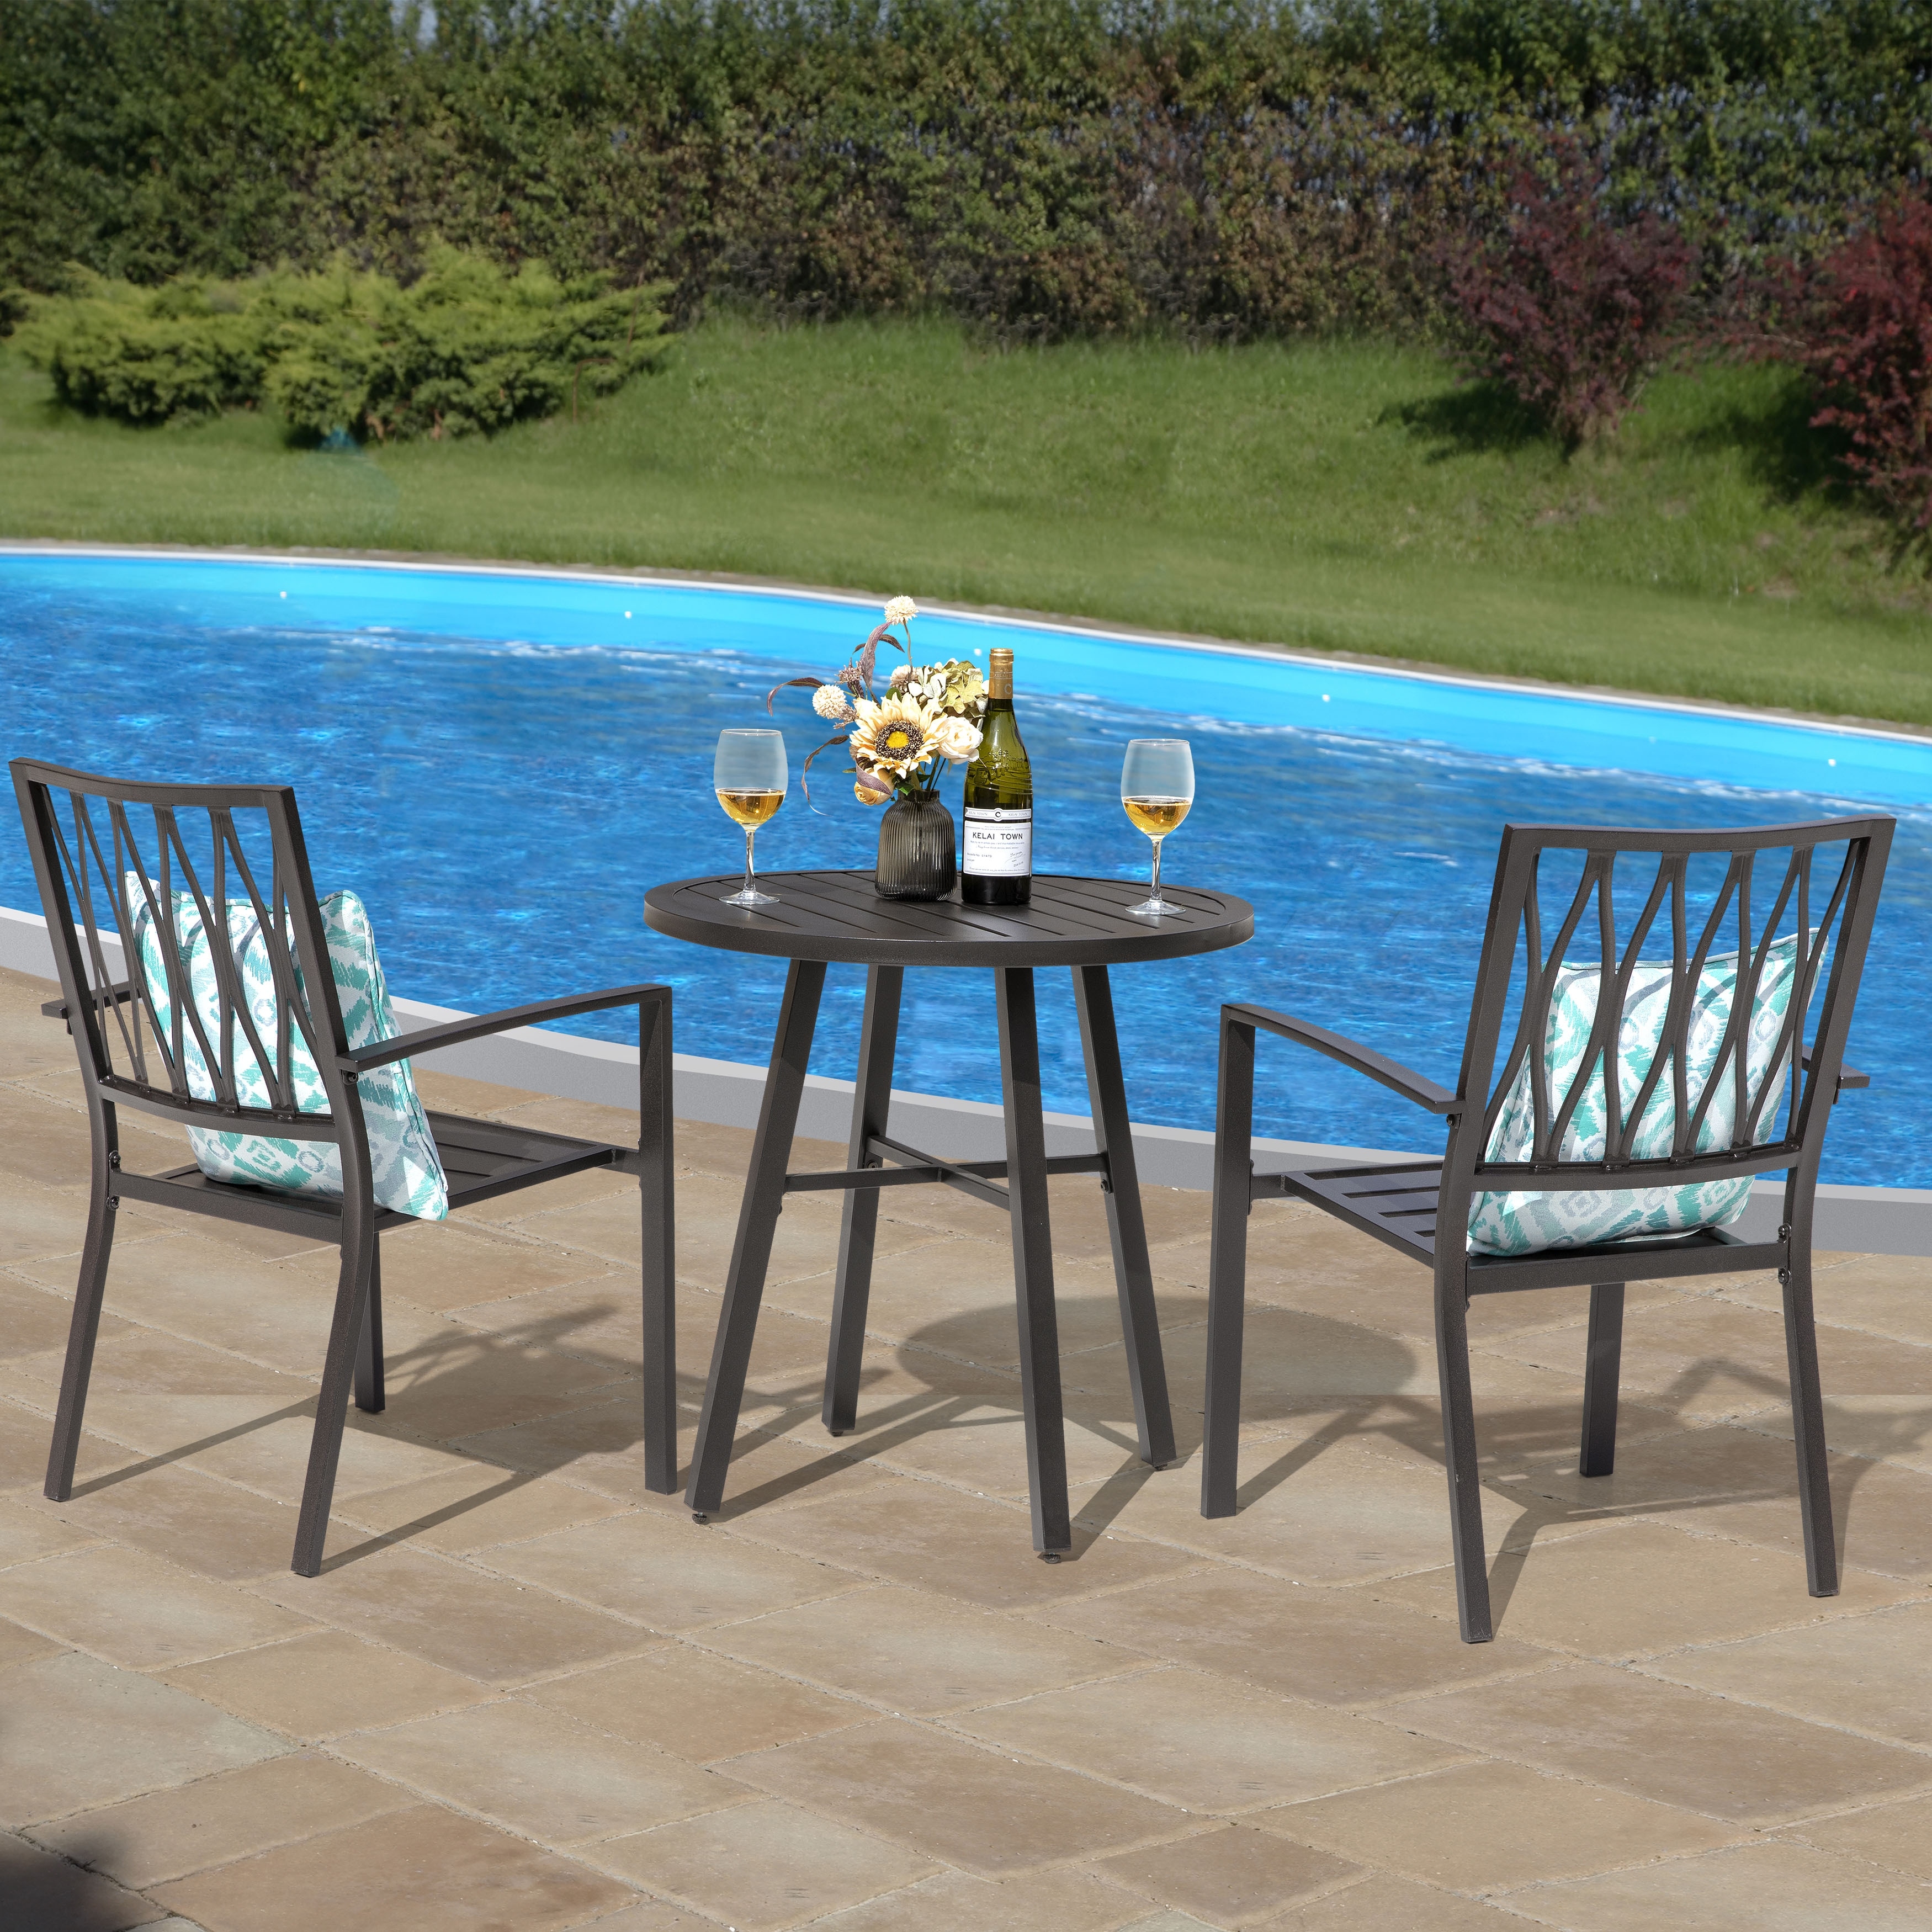 Blue Bistro Set 3 Piece Water Resistant Patio Garden Outdoor Iron Table Chairs